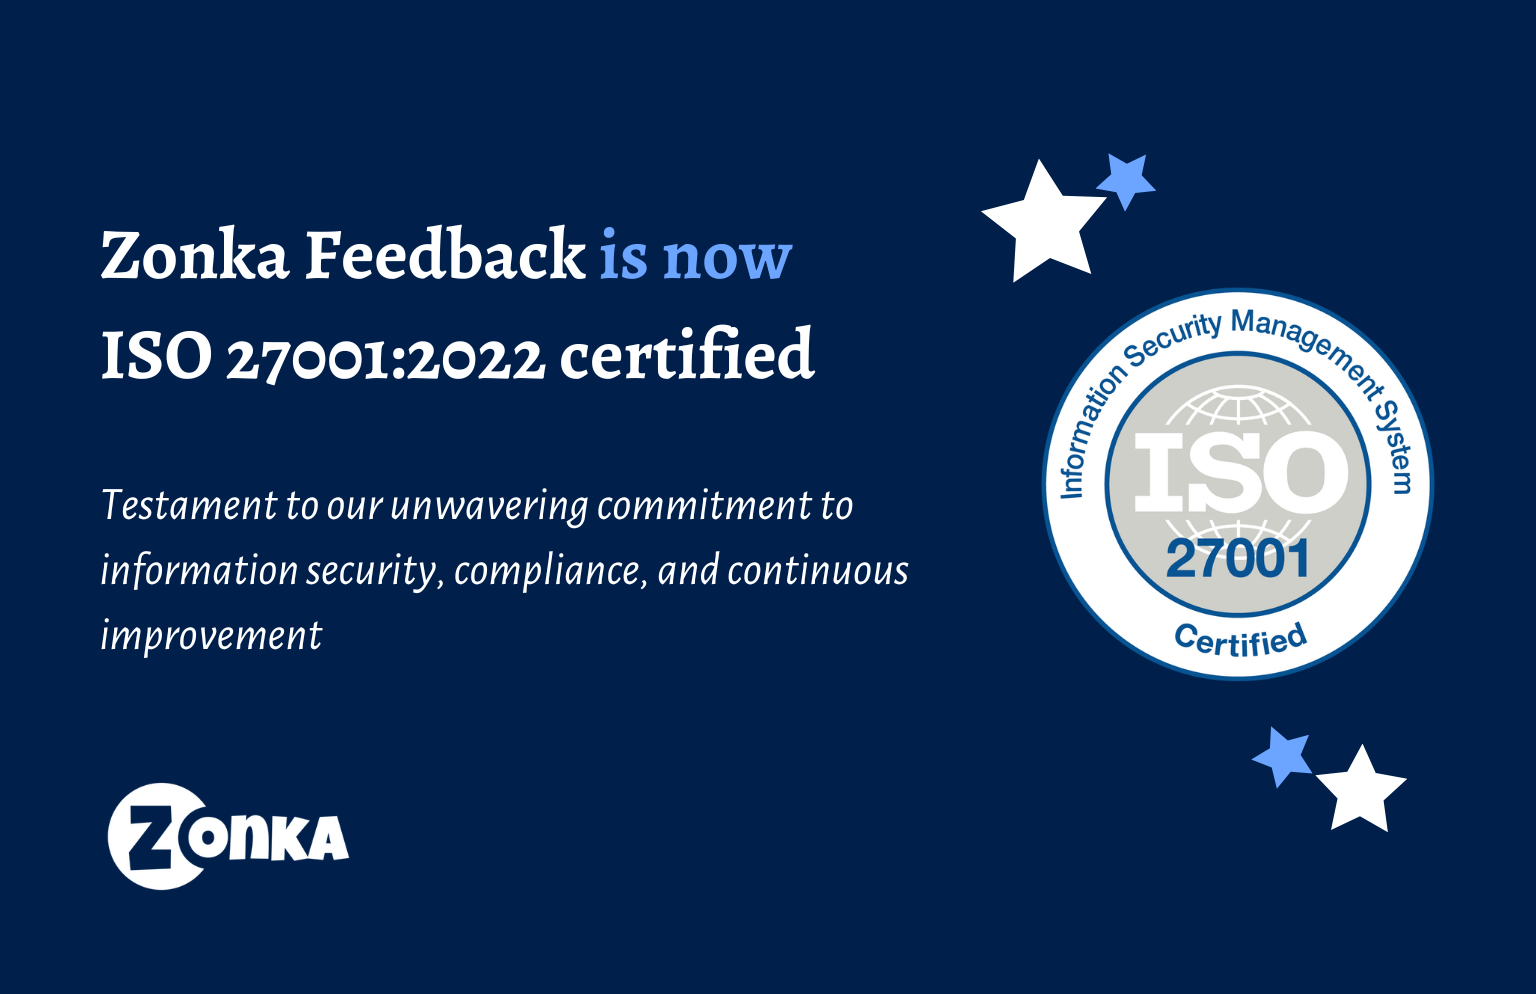 Best Value Software Awarded to Zonka Feedback by Software Suggest Recognition Awards Fall 2020